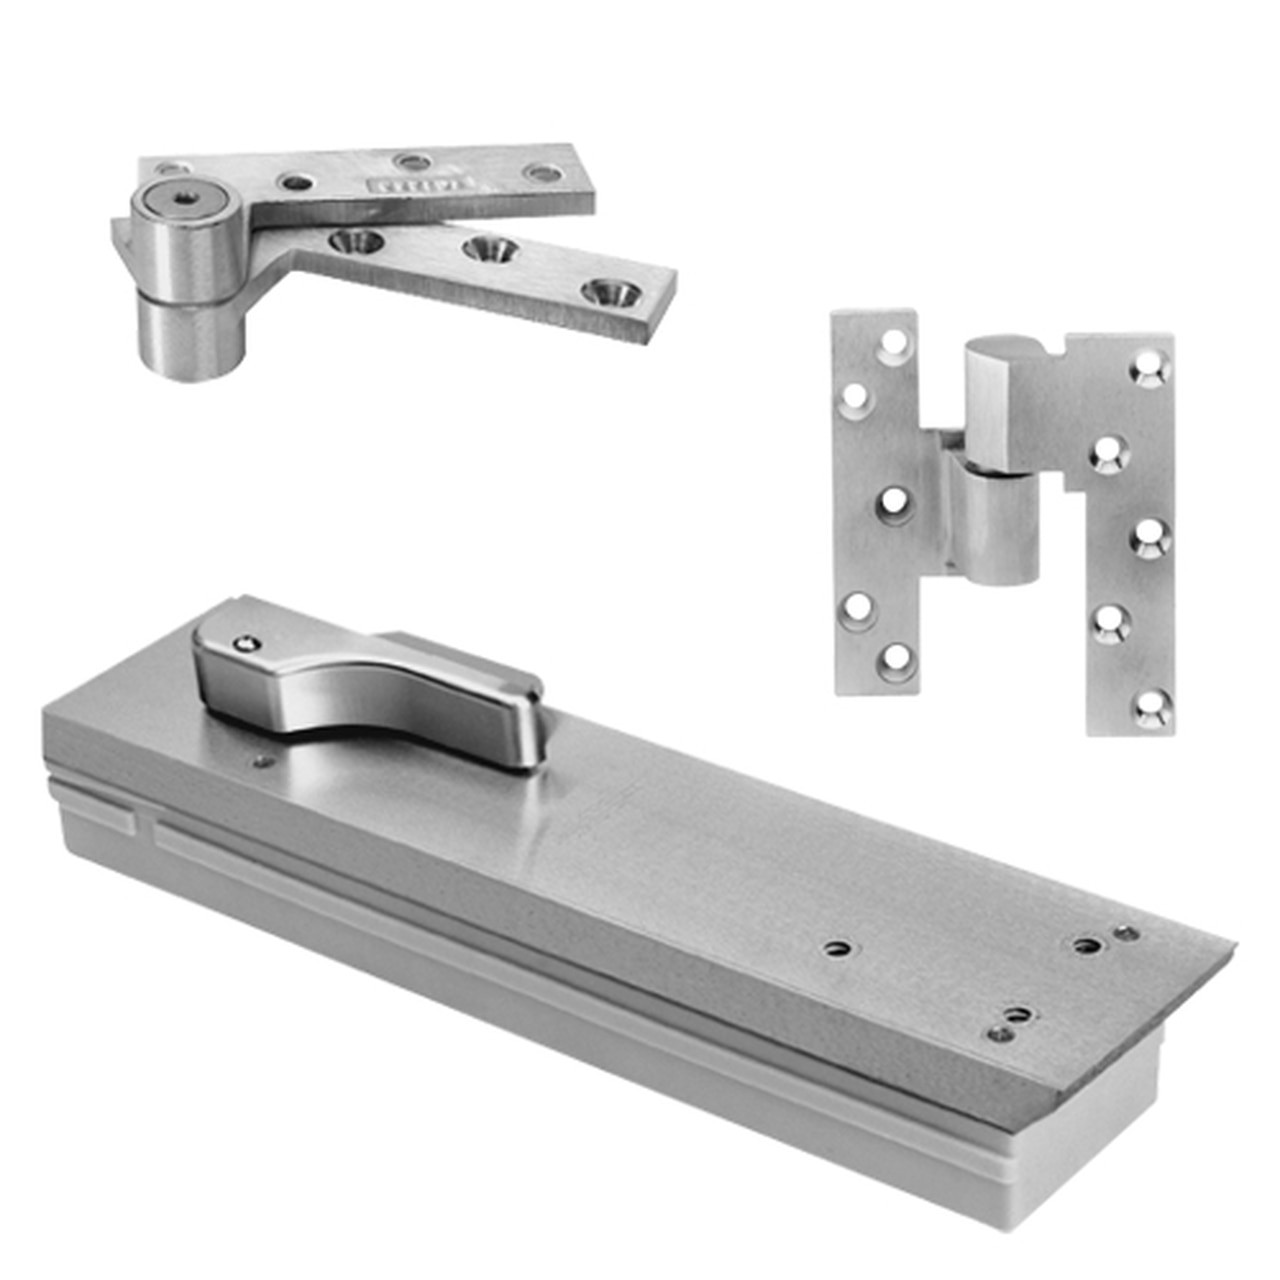 FQ5104NBC-LCC-LH-626 Rixson Q51 Series Fire Rated 3/4" Offset Hung Shallow Depth Floor Closers in Satin Chrome Finish